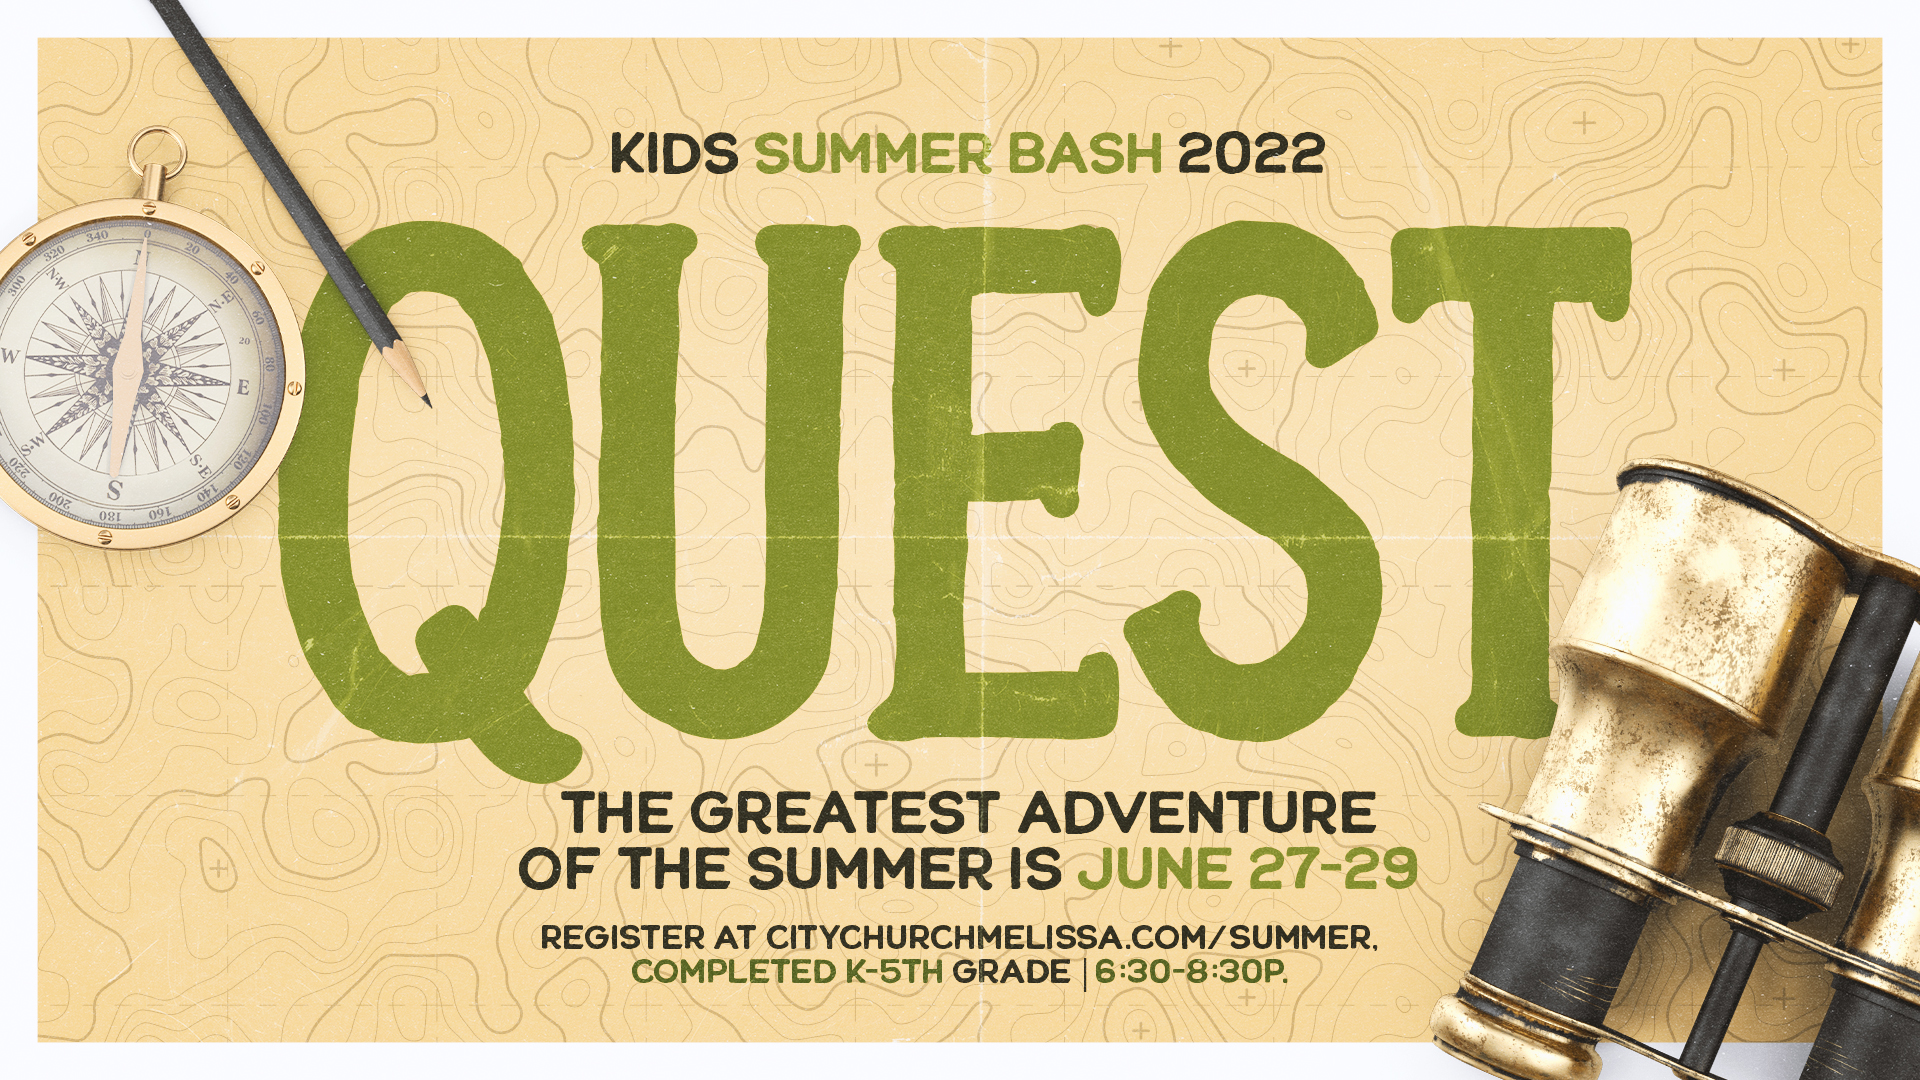 The greatest adventure of the summer! Click the graphic for more information.